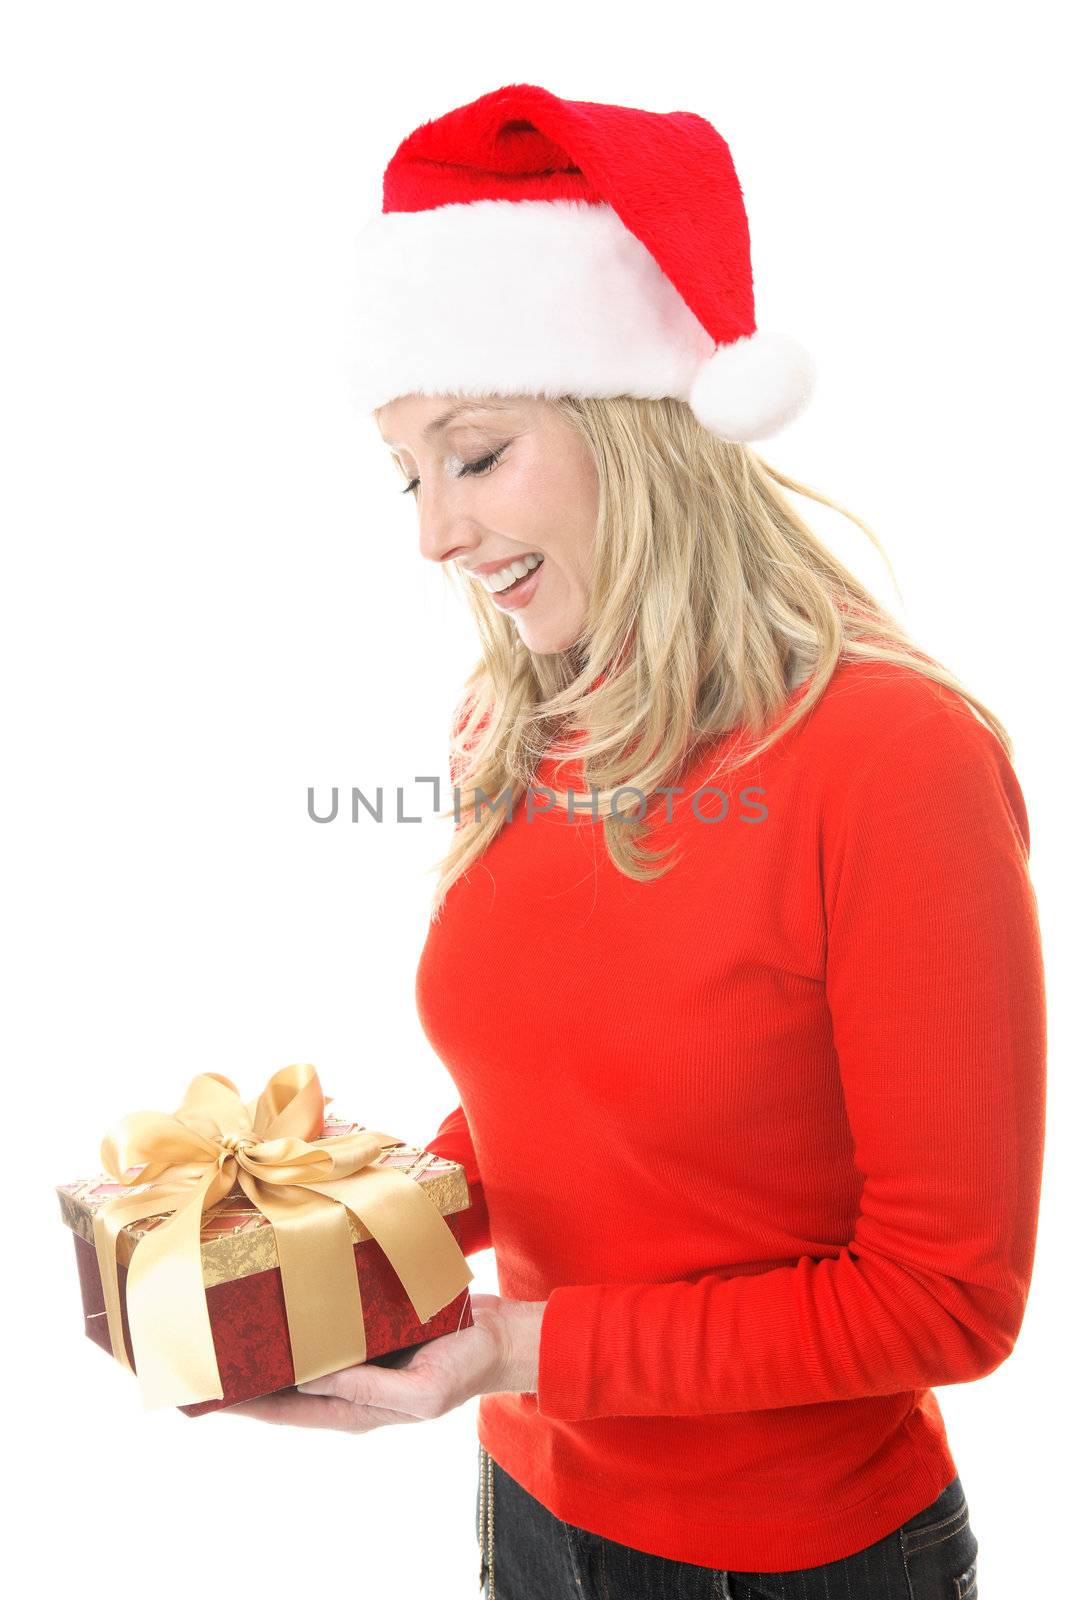 Smiling woman holding a Christmas gift by lovleah